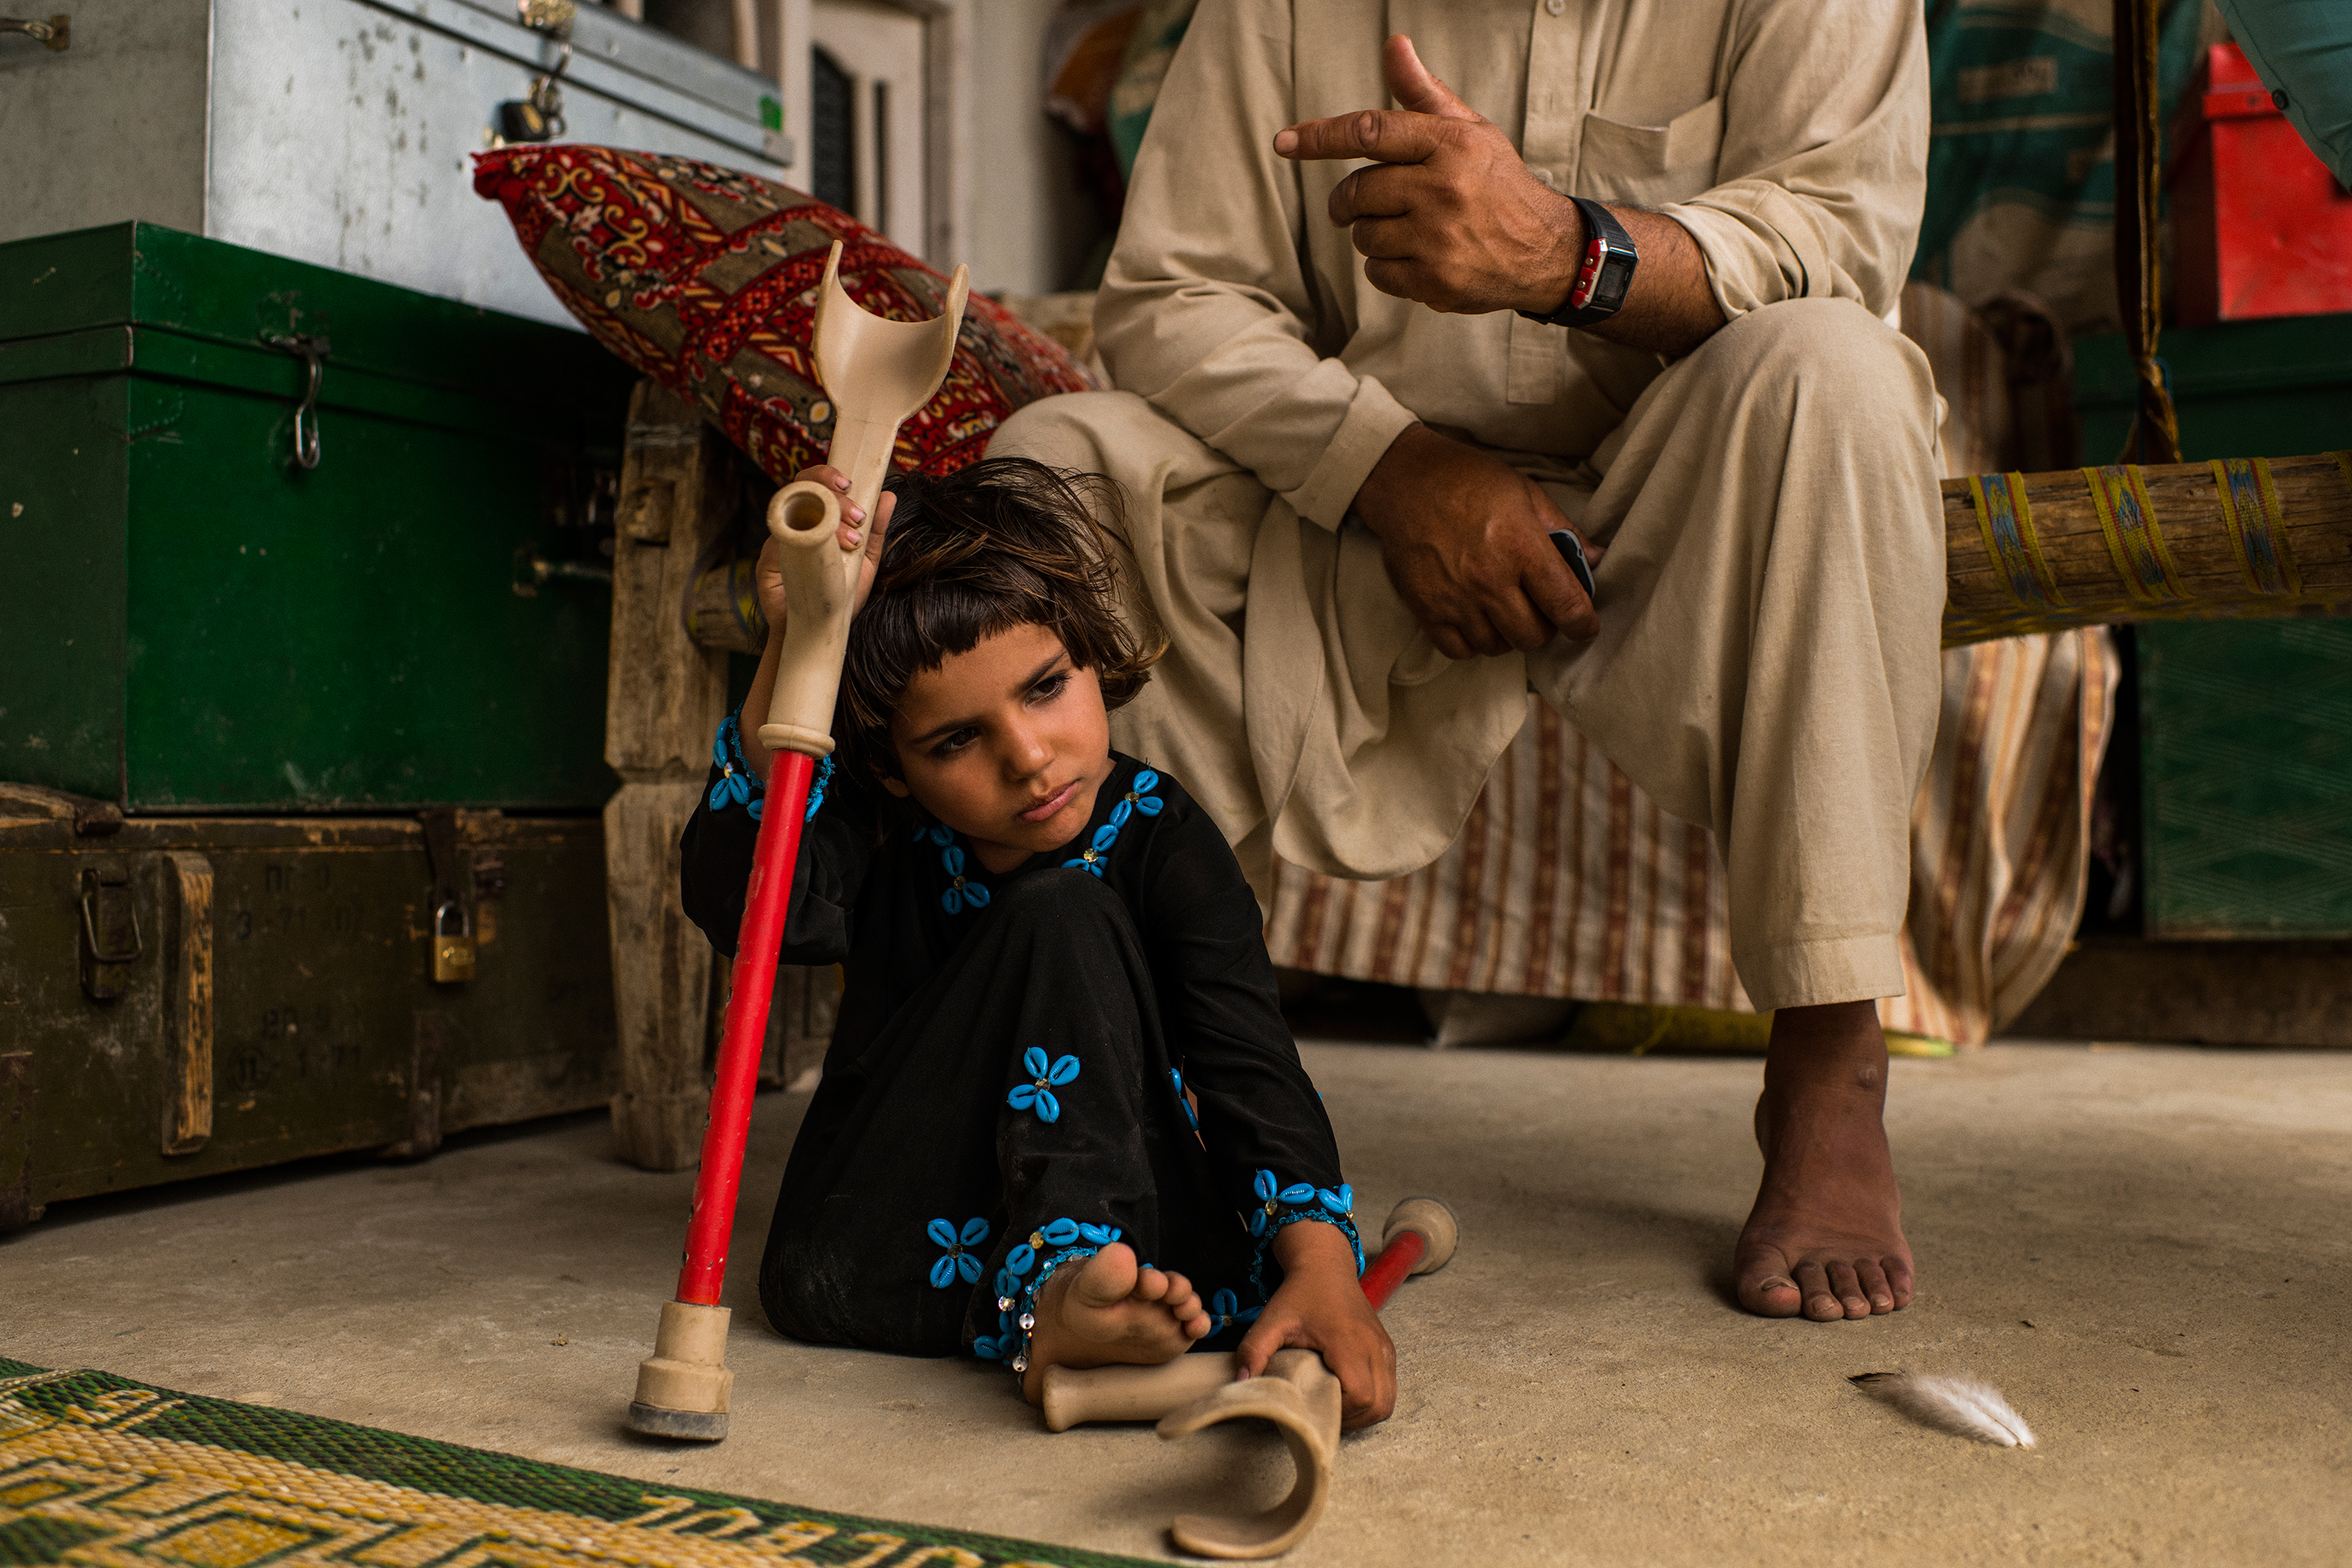 Marwa with her crutches in July. Her mother and twin sister were killed in the blast that led to the loss of part of her right leg. (Andrew Quilty for TIME)